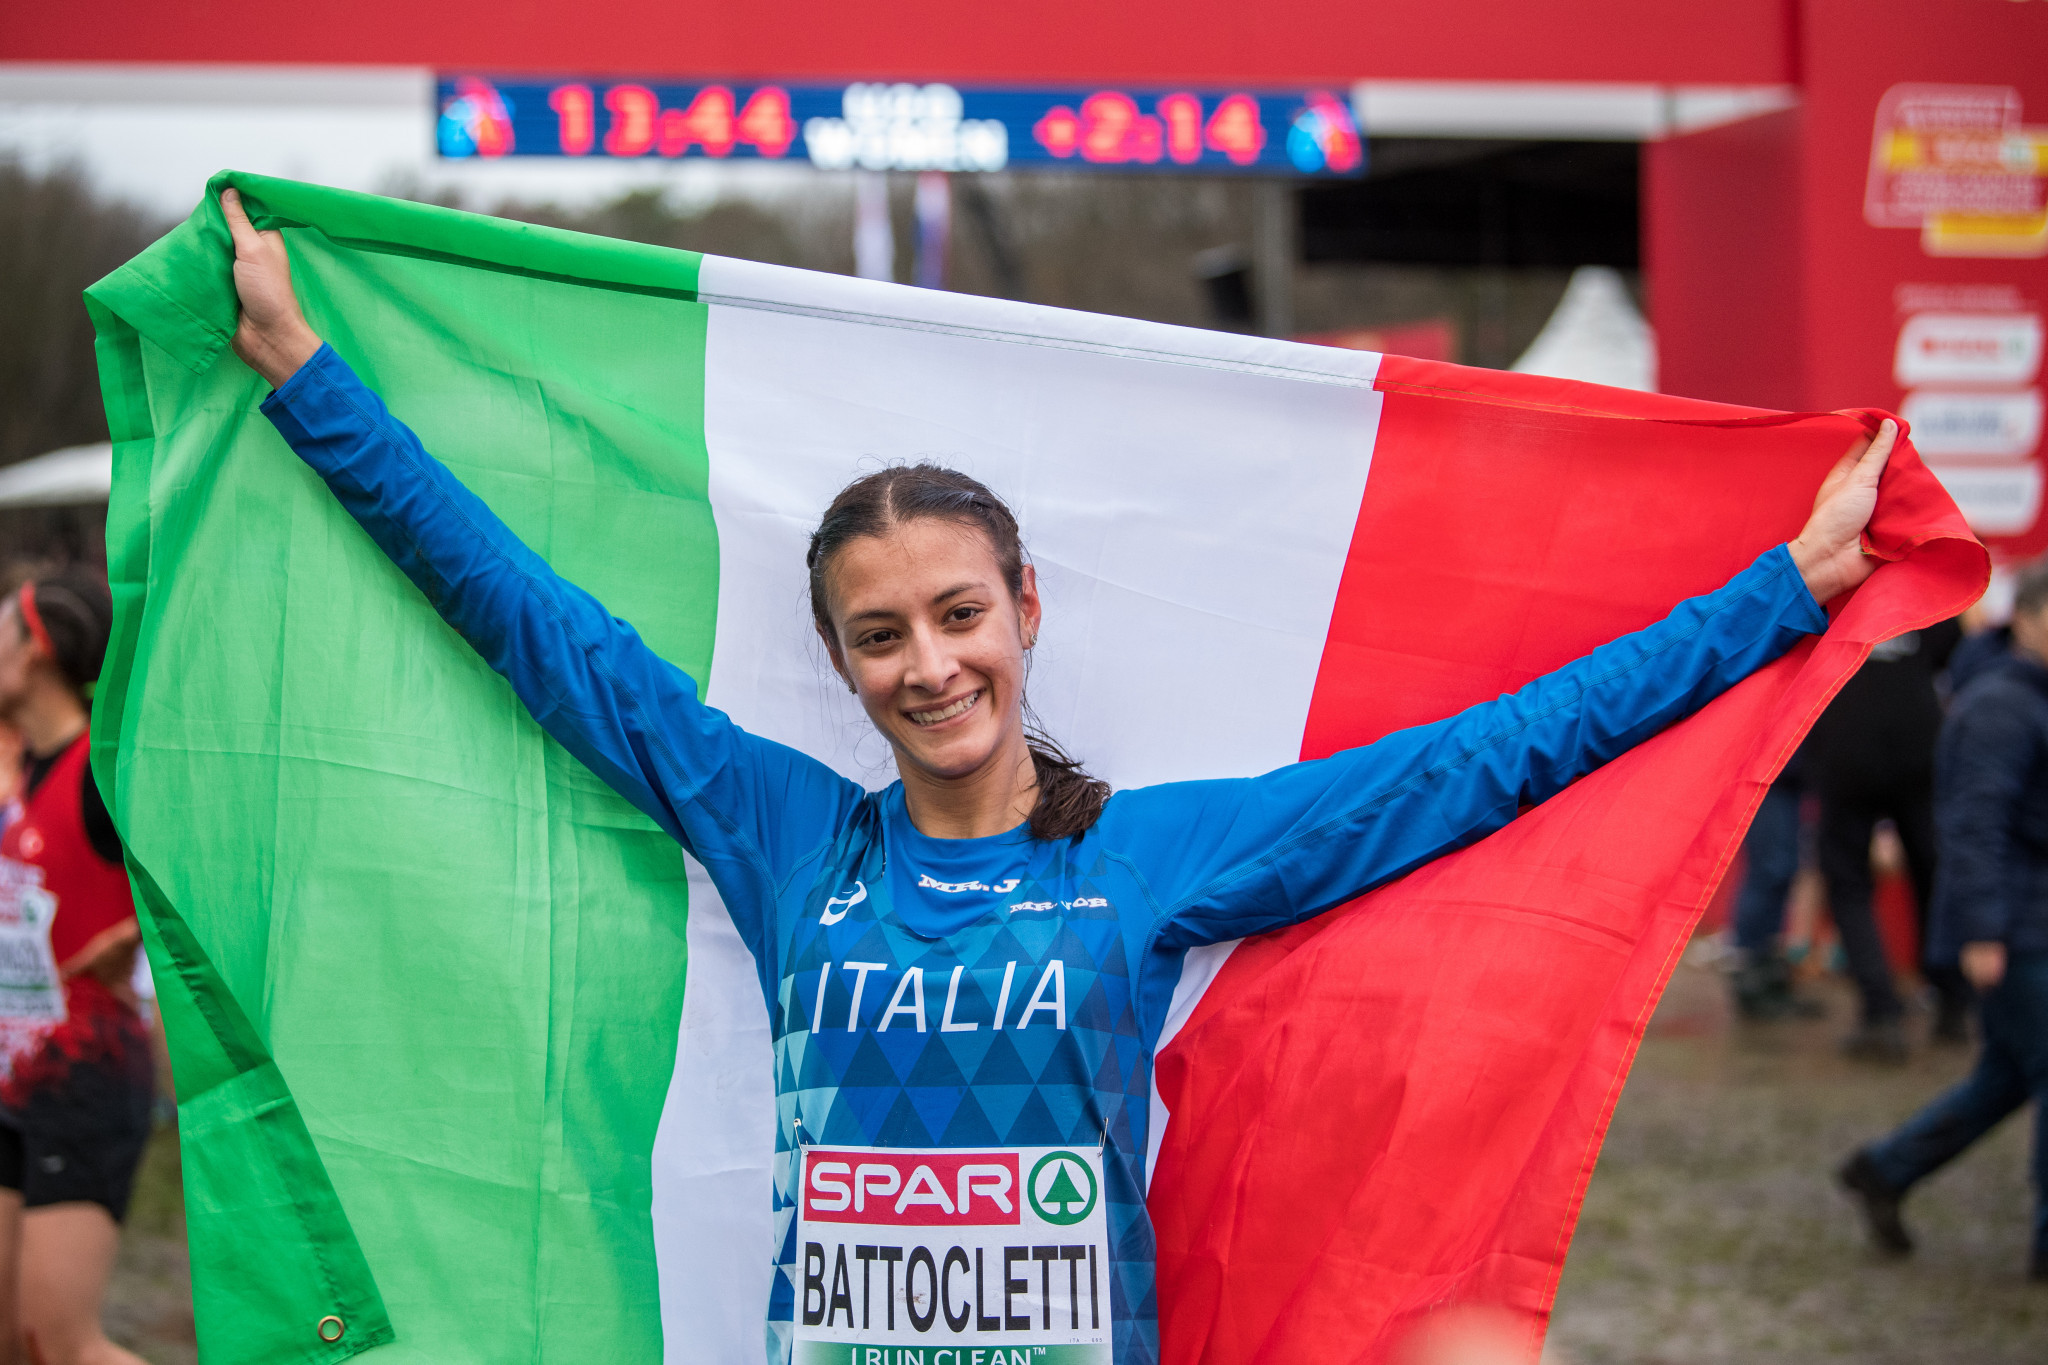 Nadia Battocletti will carry home hopes at the Cinque Mulini ©Getty Images